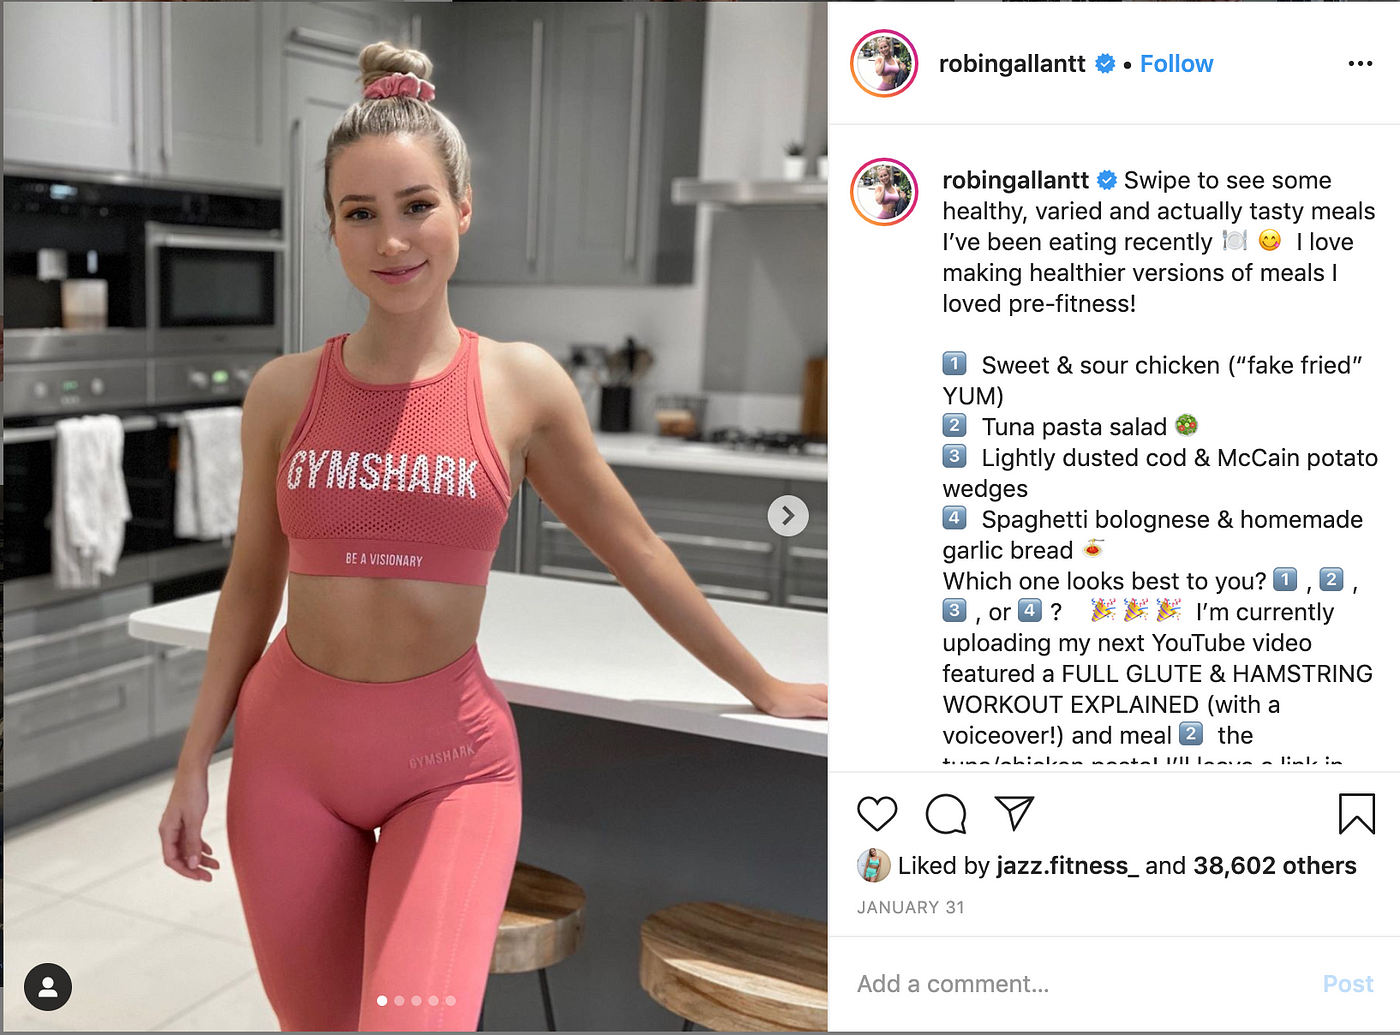 Gymshark: a biting review of their online public presence, by Bea  Wilkinson, Digital Society